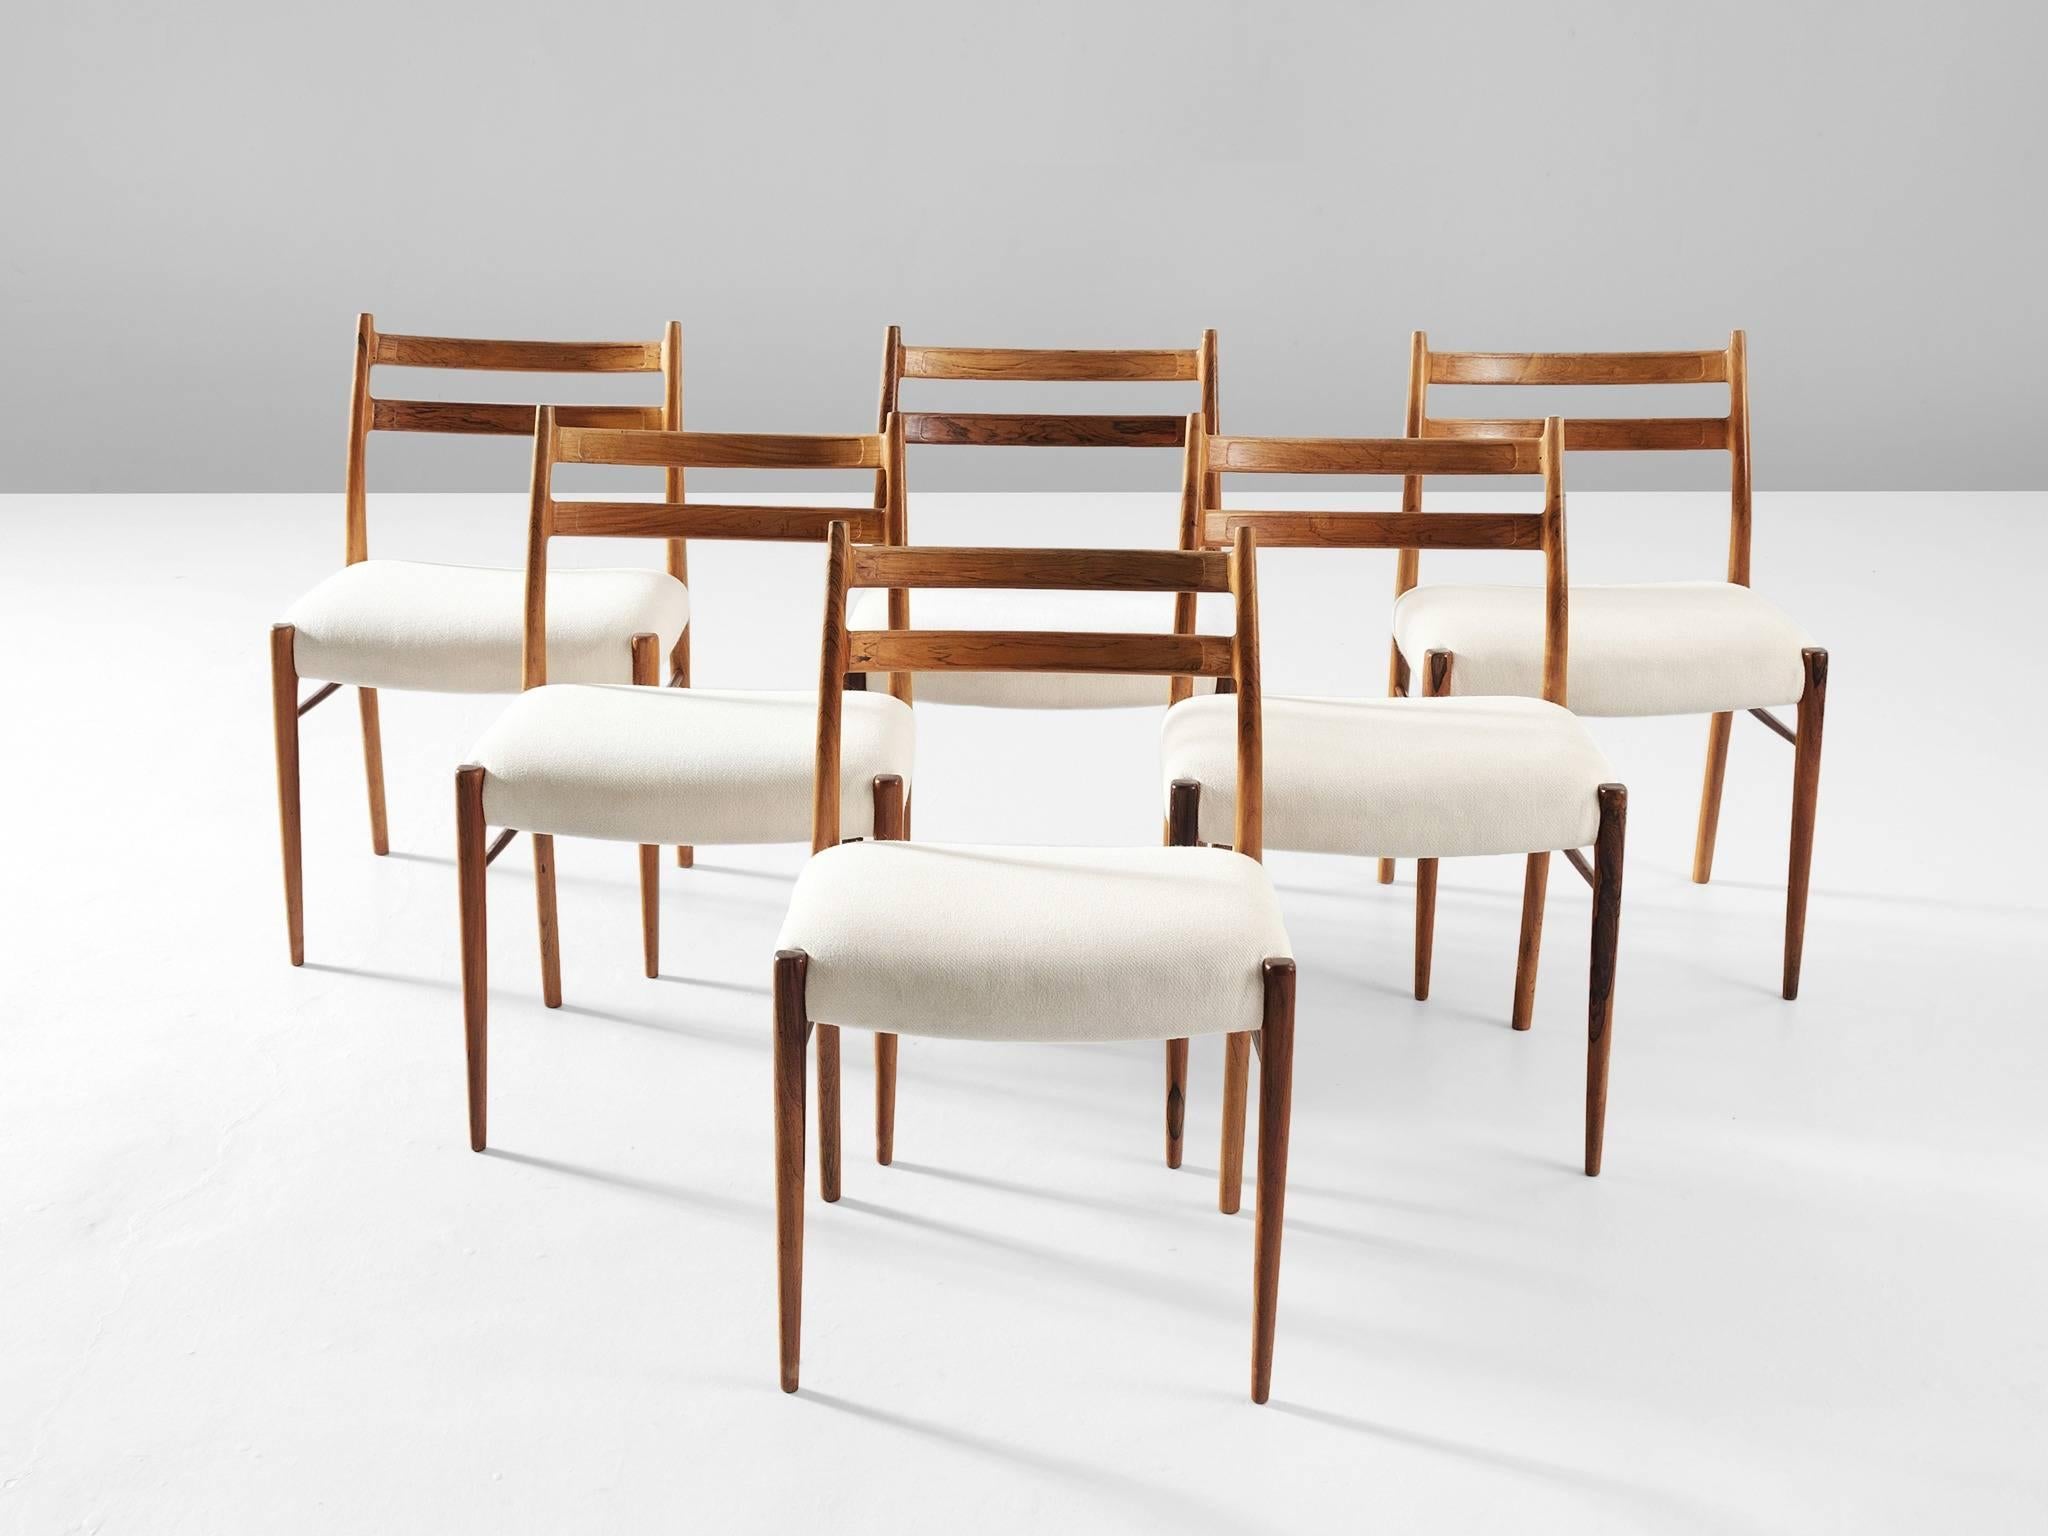 Set of six chairs model GS710, in rosewood and fabric by Arne Wahl Iversen for Glyngore Stolefabrik, Denmark, 1960s. 

Very elegant set of six dining chairs by Danish designer Arne Wahl Iversen. The rosewood frame has a fragile, yet highly